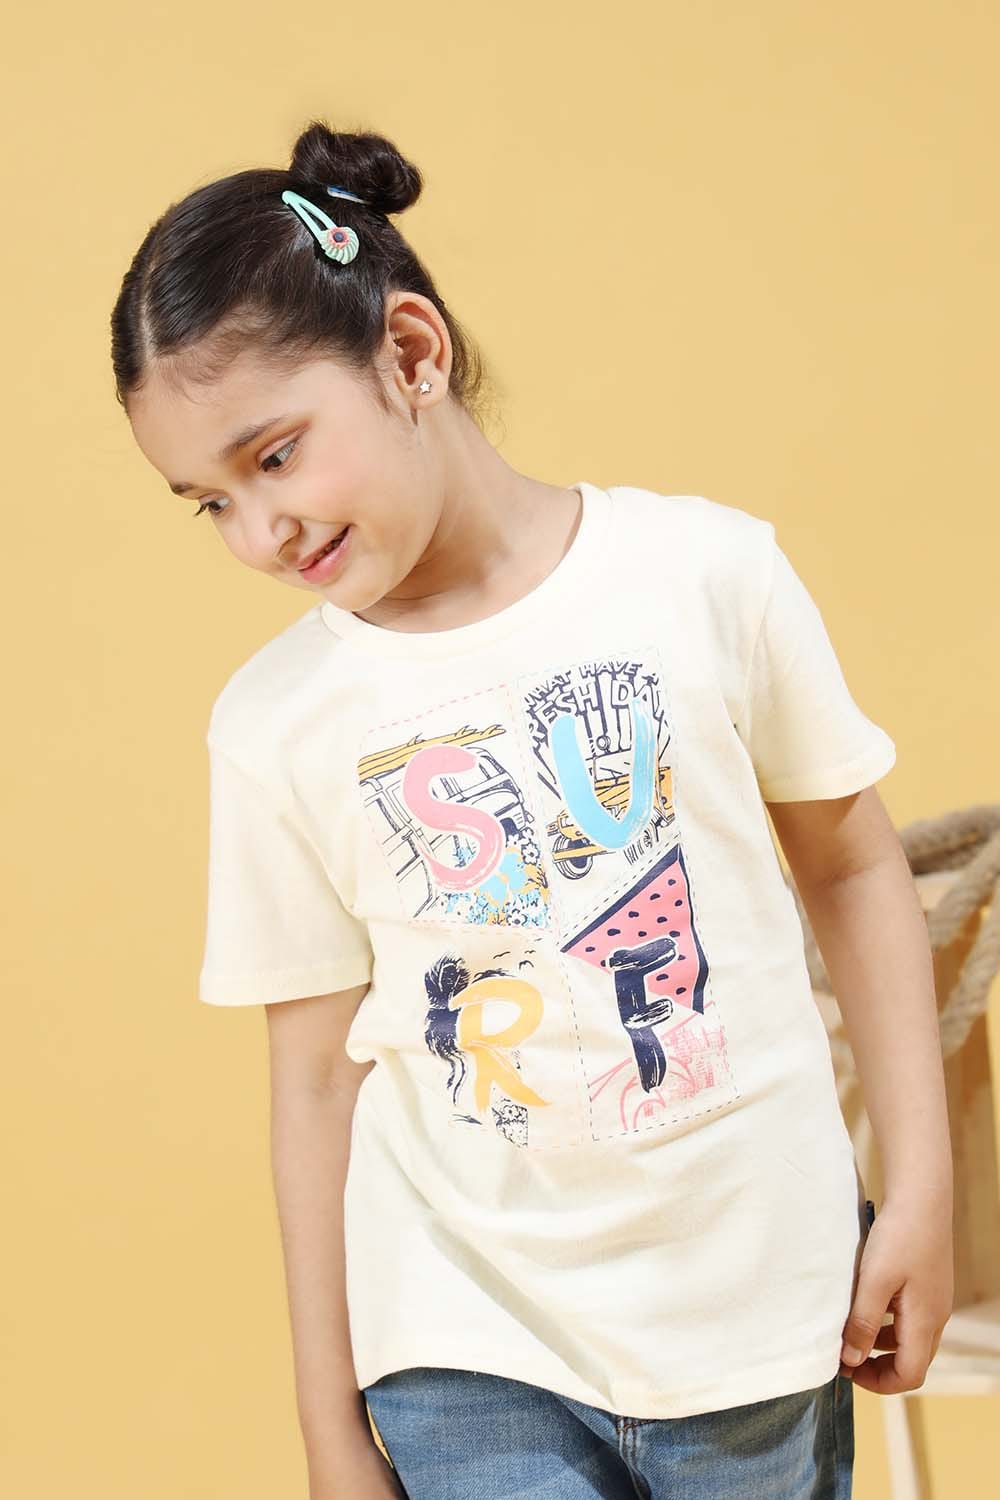 Hope Not Out by Shahid Afridi Girls Knit T-Shirt Surf Graphic White Half Sleeve Tee for Girls